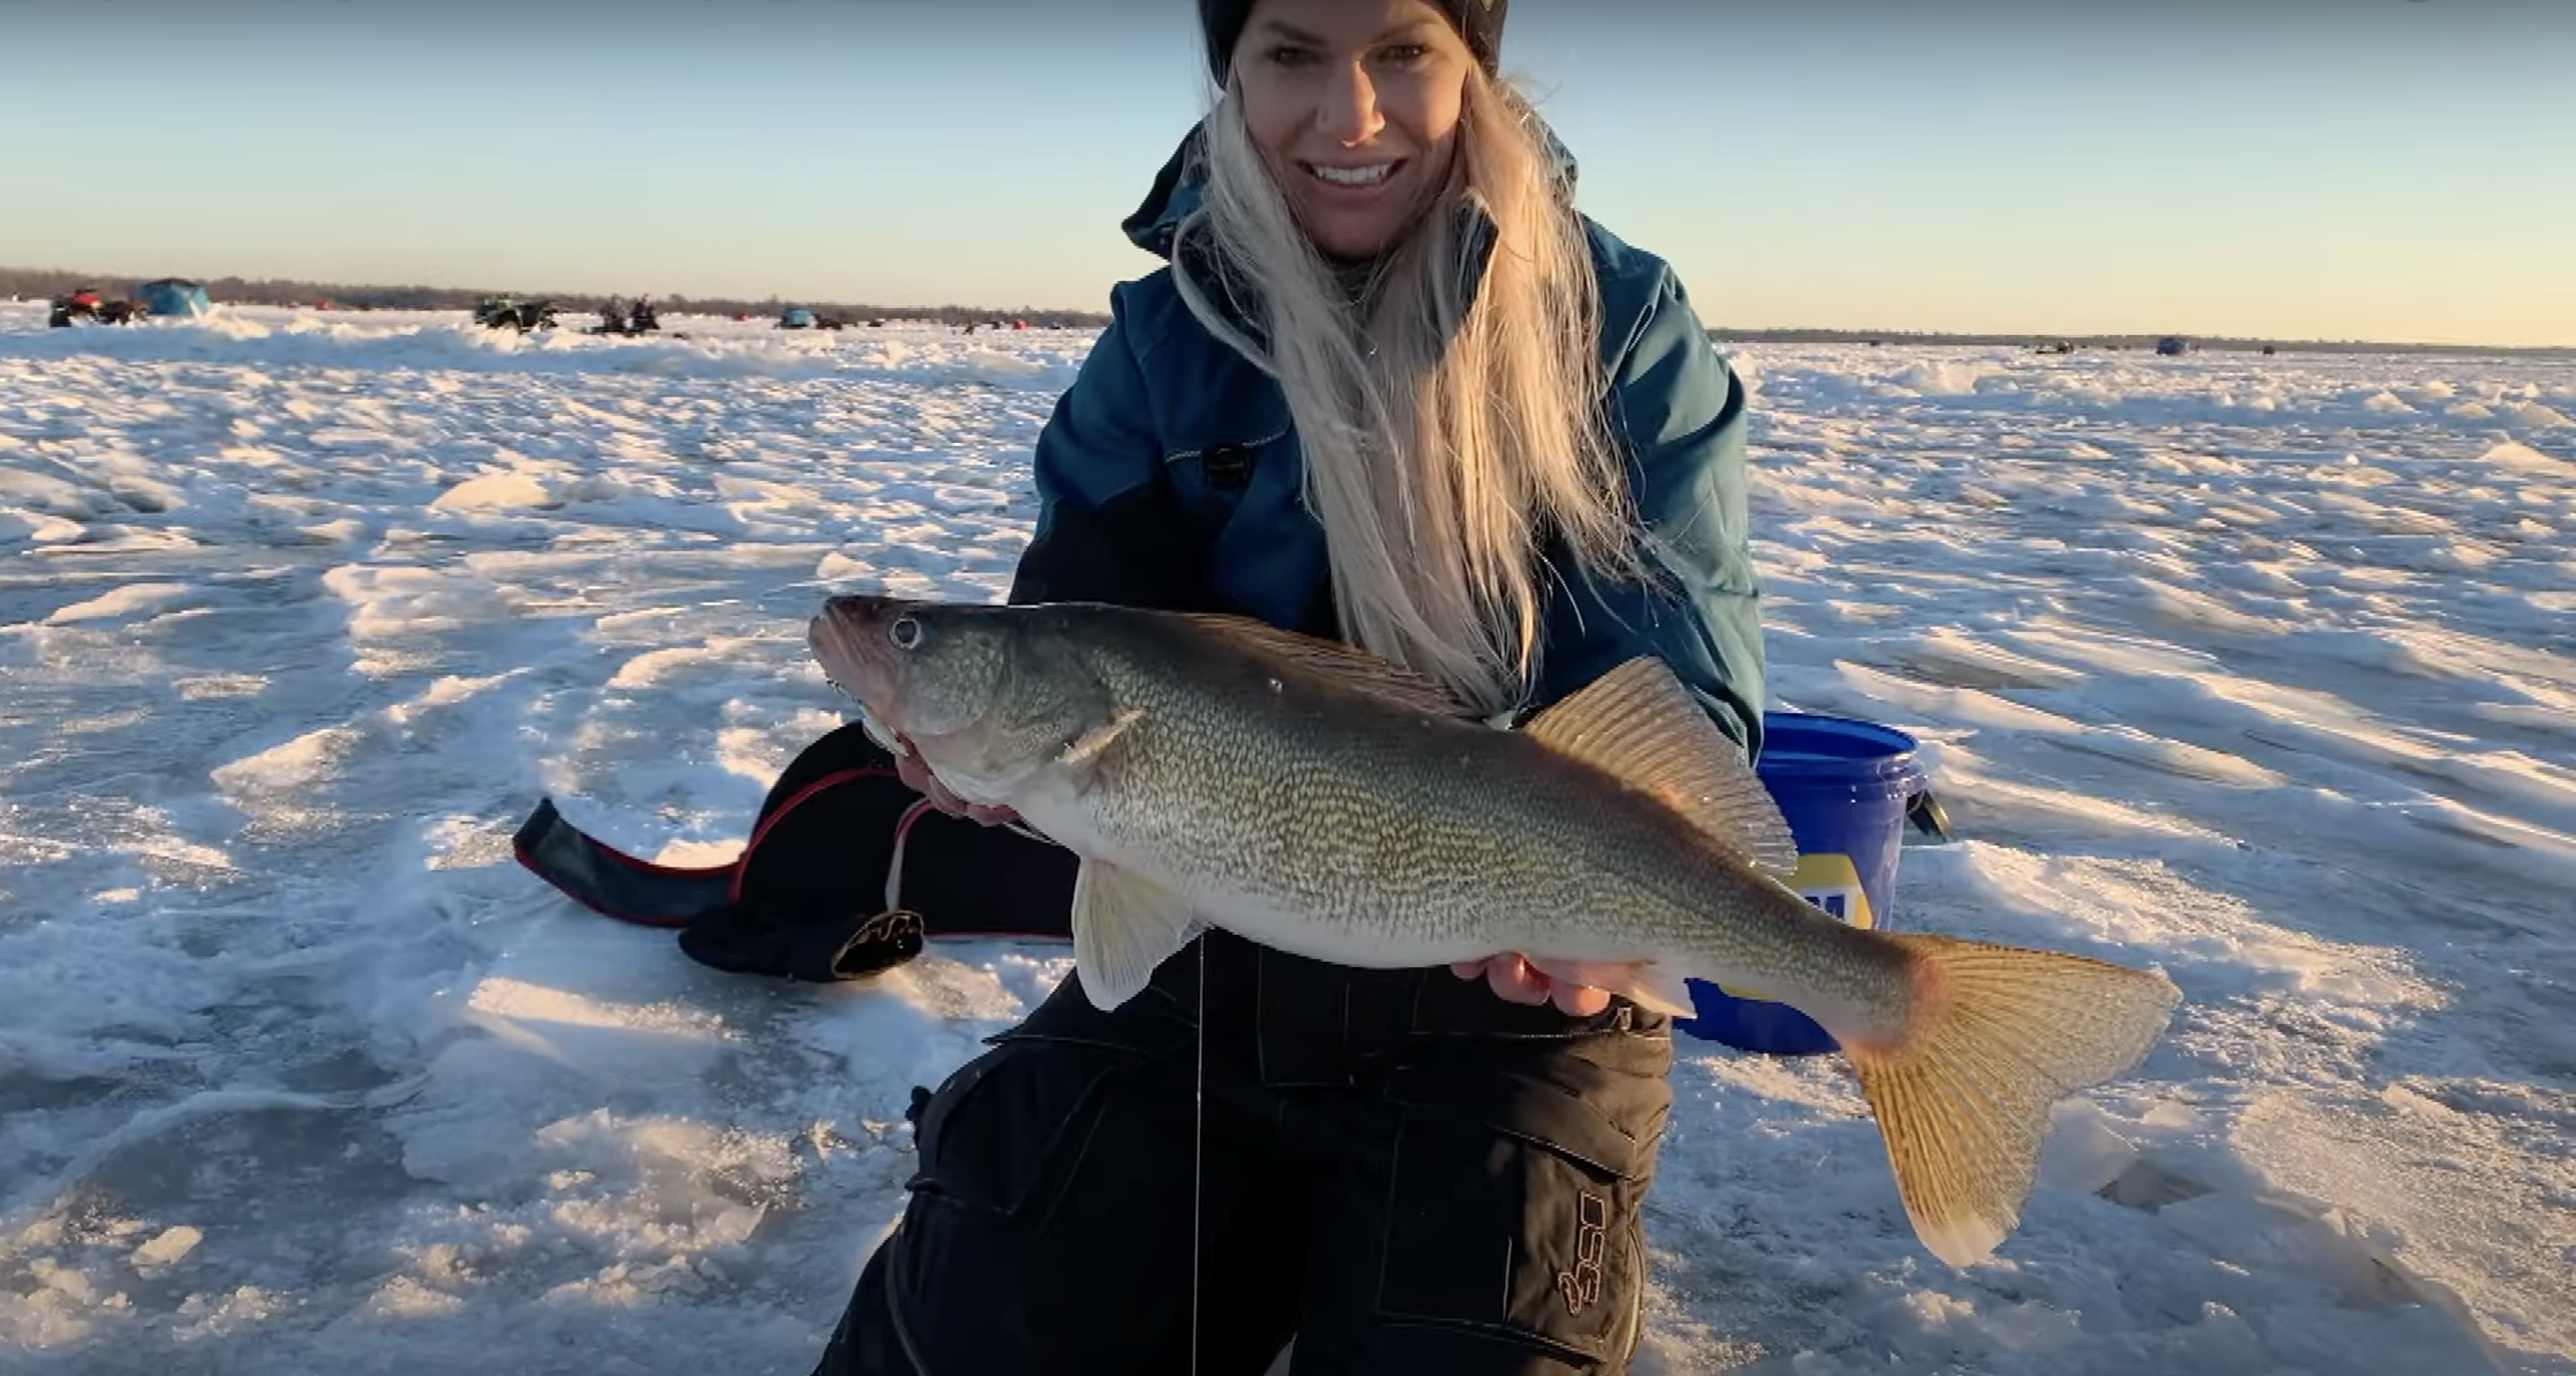 Big RED Ice Fishing Tip Down-Tip Up- Sensitive to The Slightest Fish Bites-  Used for Both Larger Reels and Heavier Line as Well as Smaller Reels and